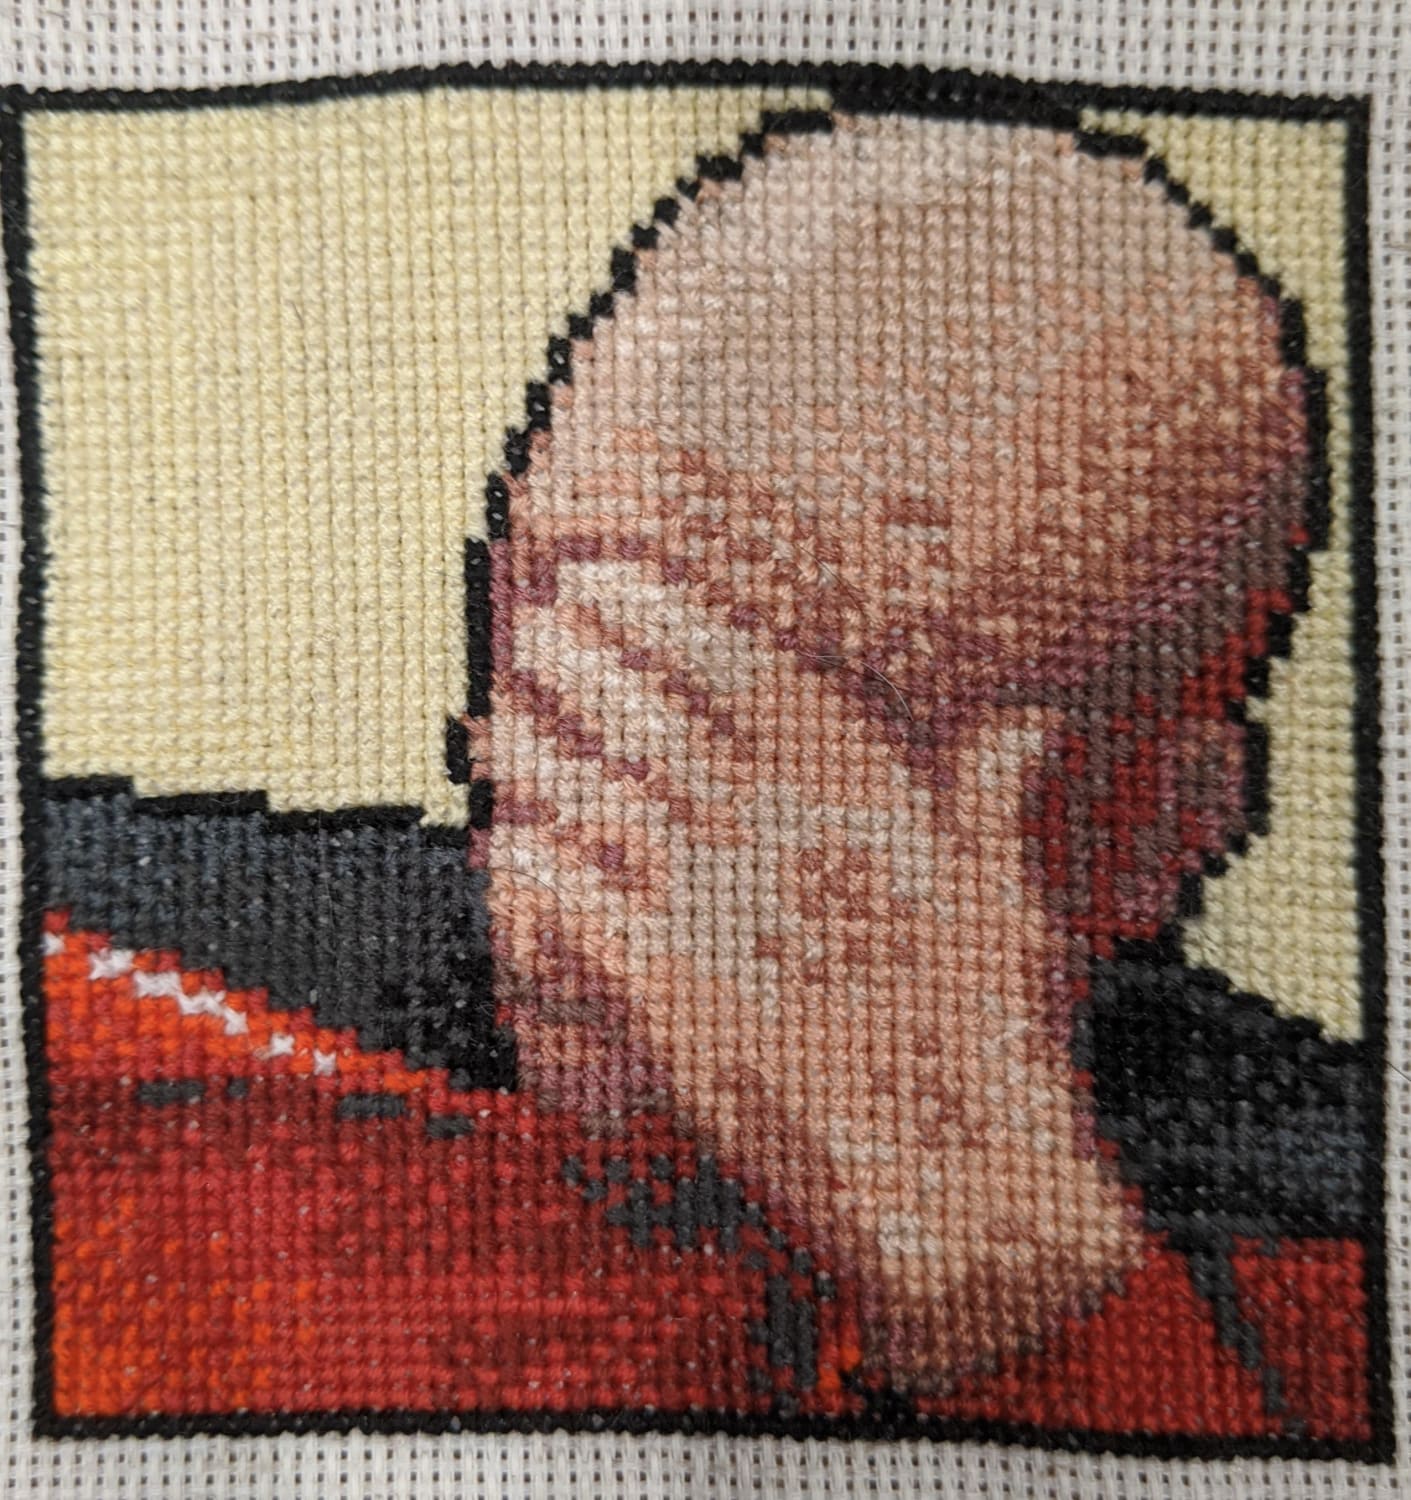 [FO] Facepalm Picard. Another stitch for my home office.